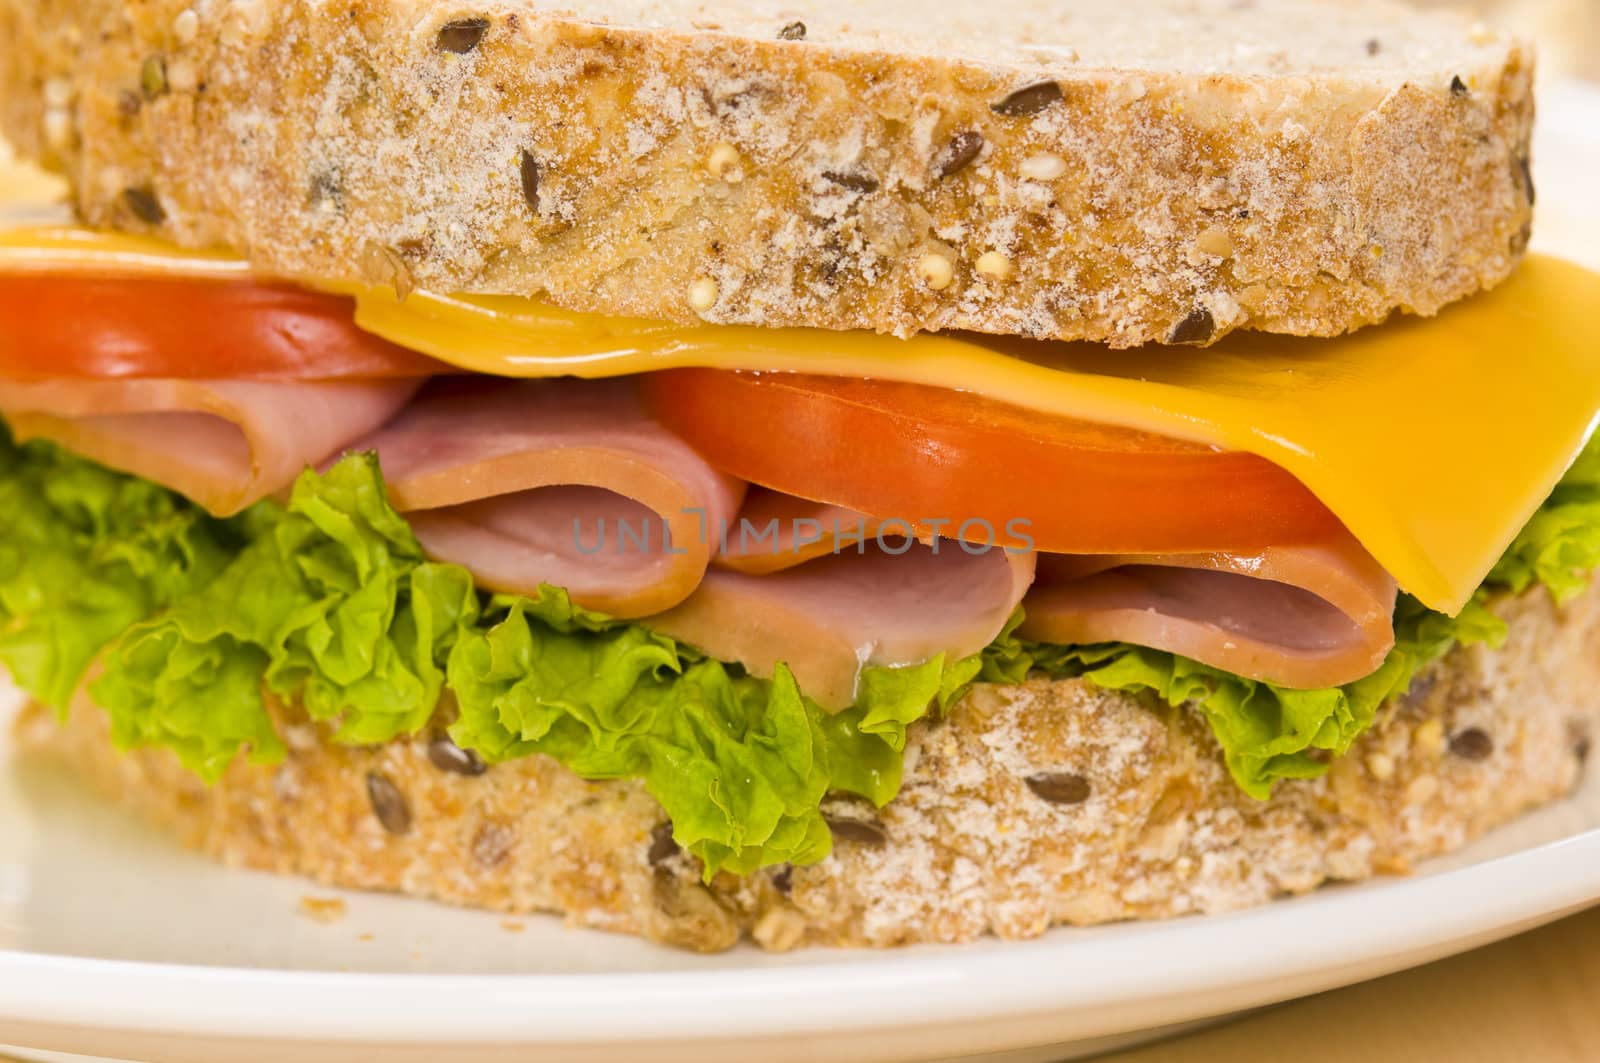 Close-up shoot of a Sandwich with rich Salad in simple setting